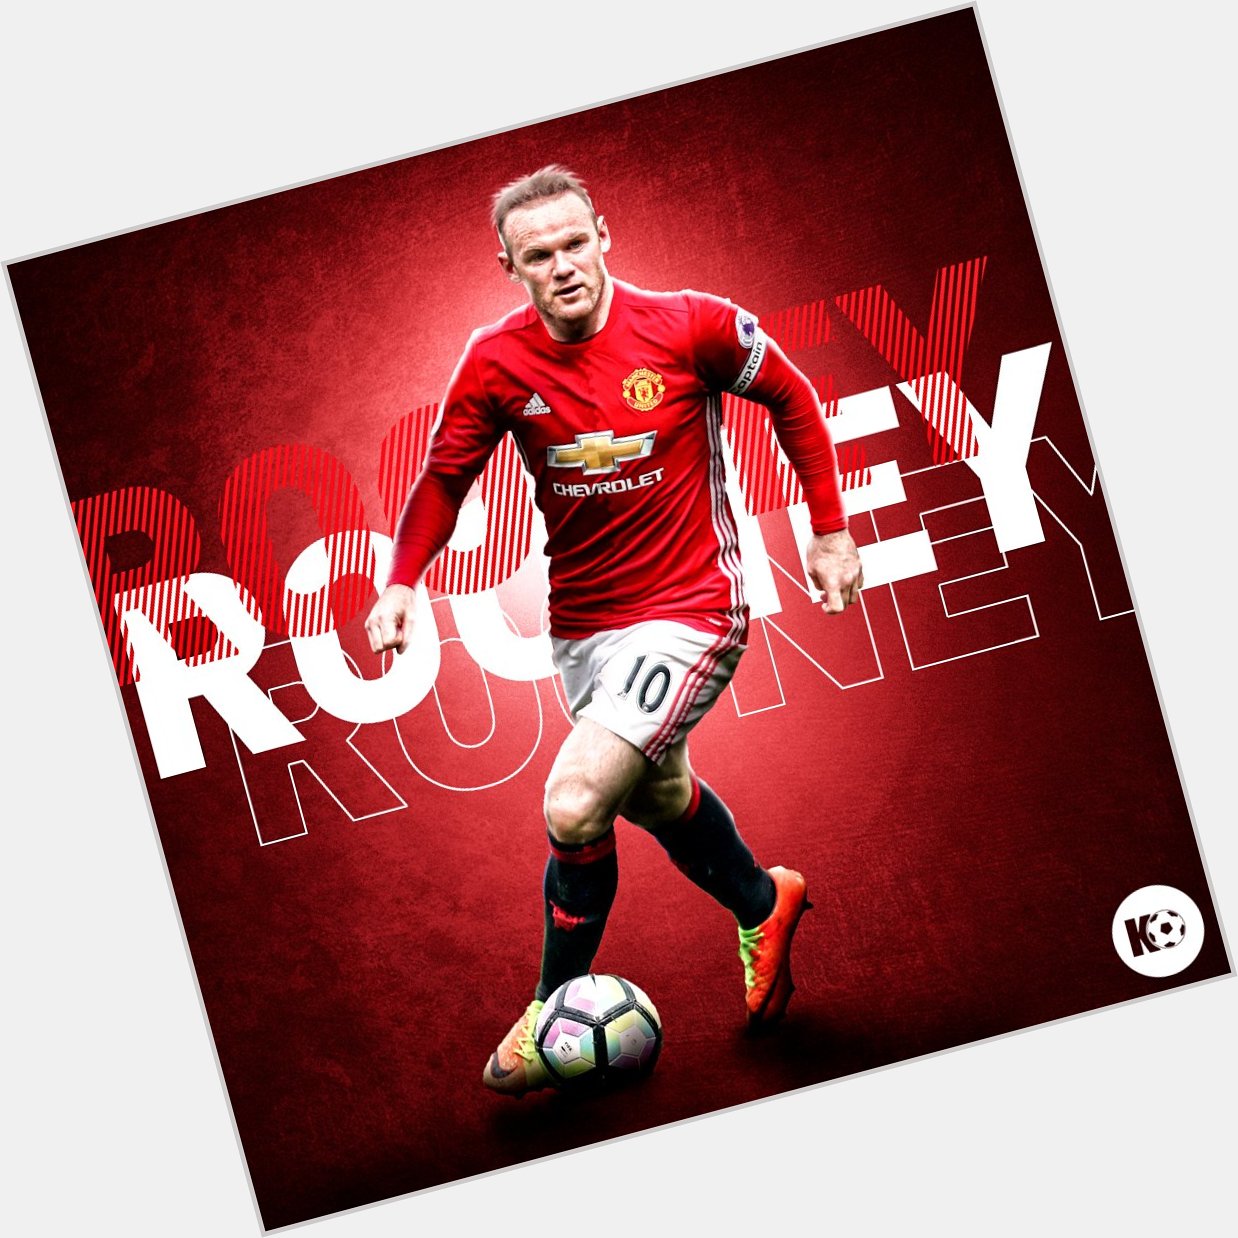 Join in wishing Wayne Rooney a Happy Birthday! For international football news 